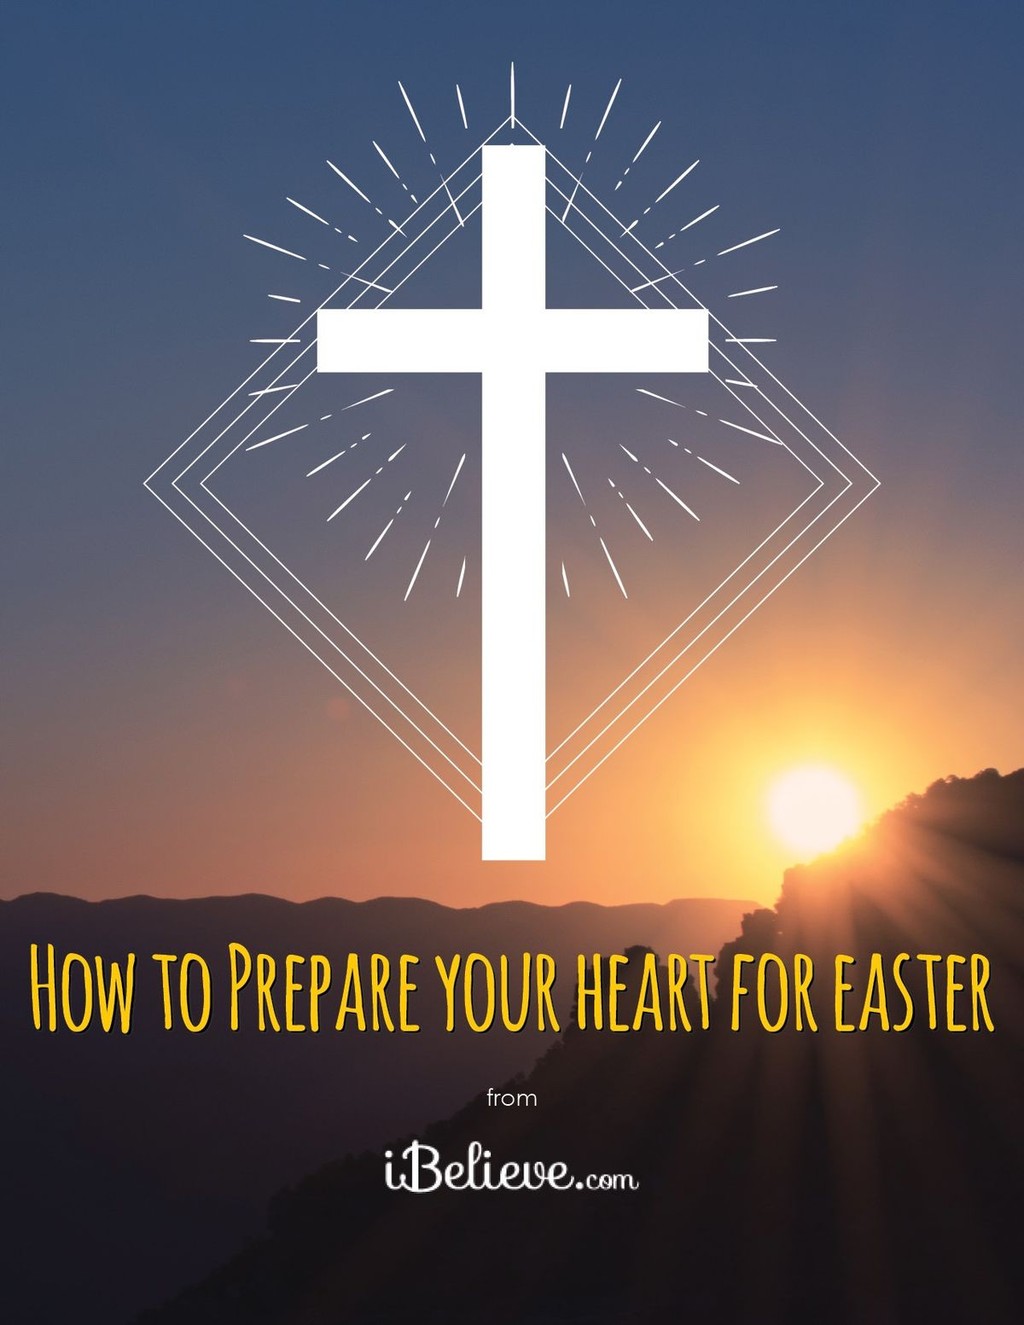 How to Prepare Your Heart for Easter